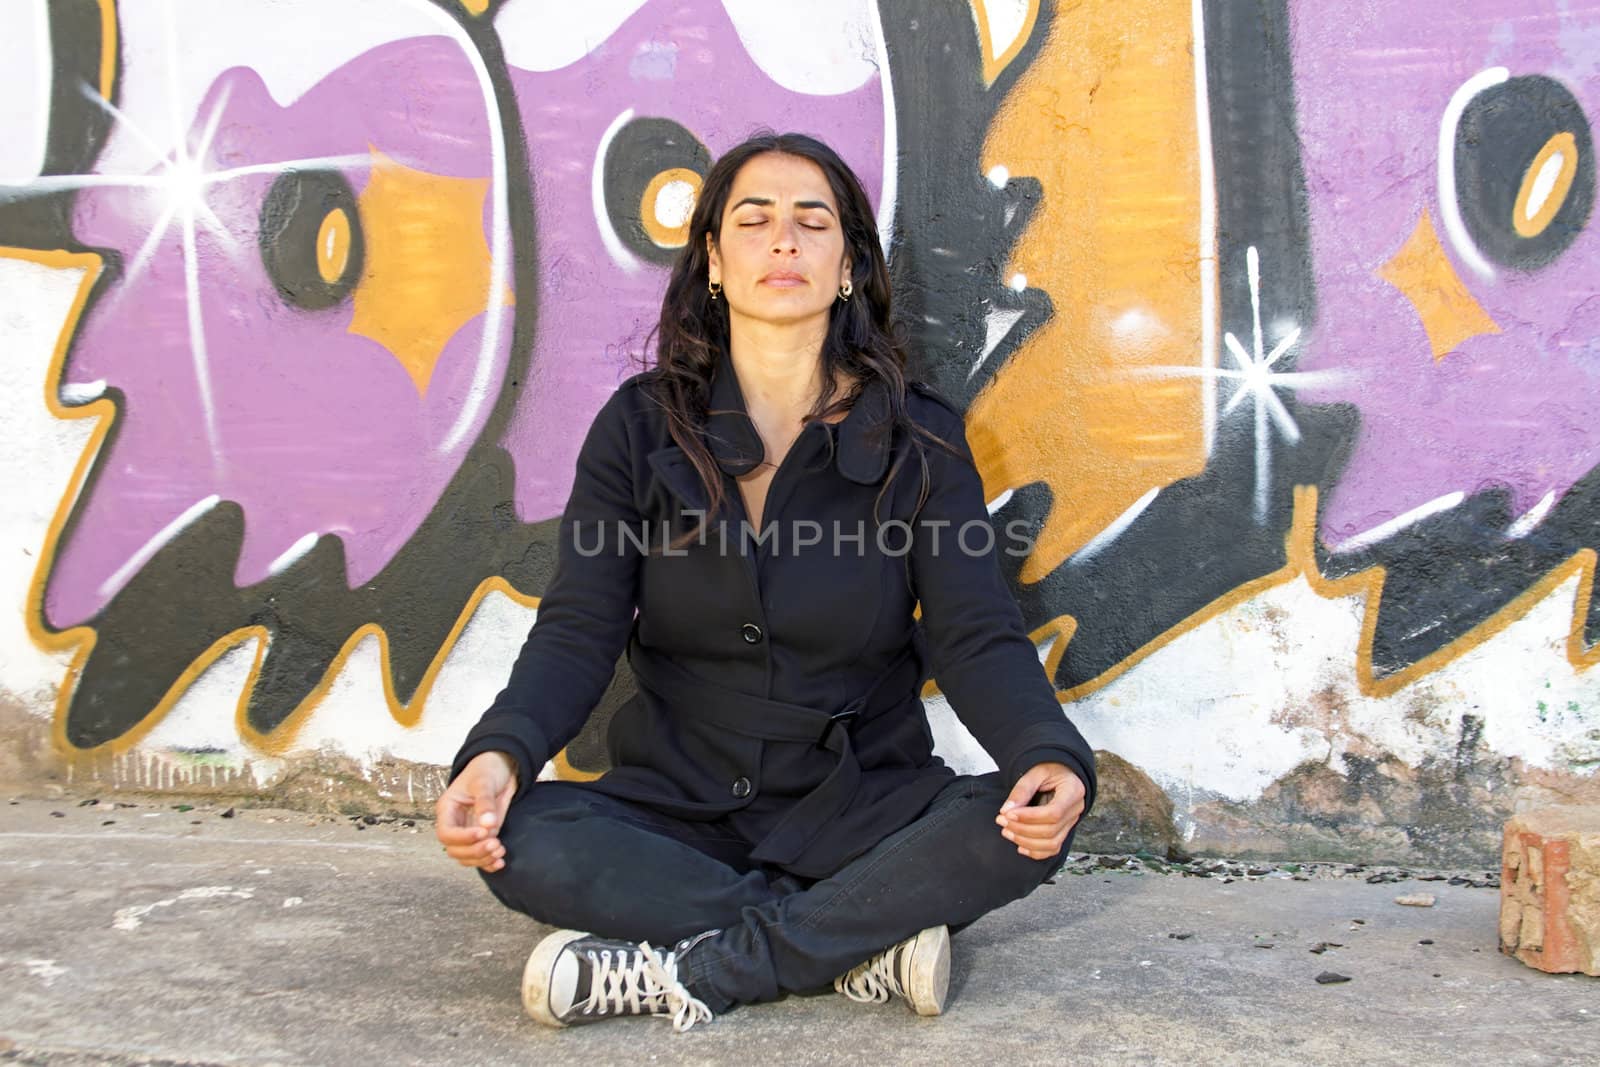 Woman in meditation in front of a graffiti wall